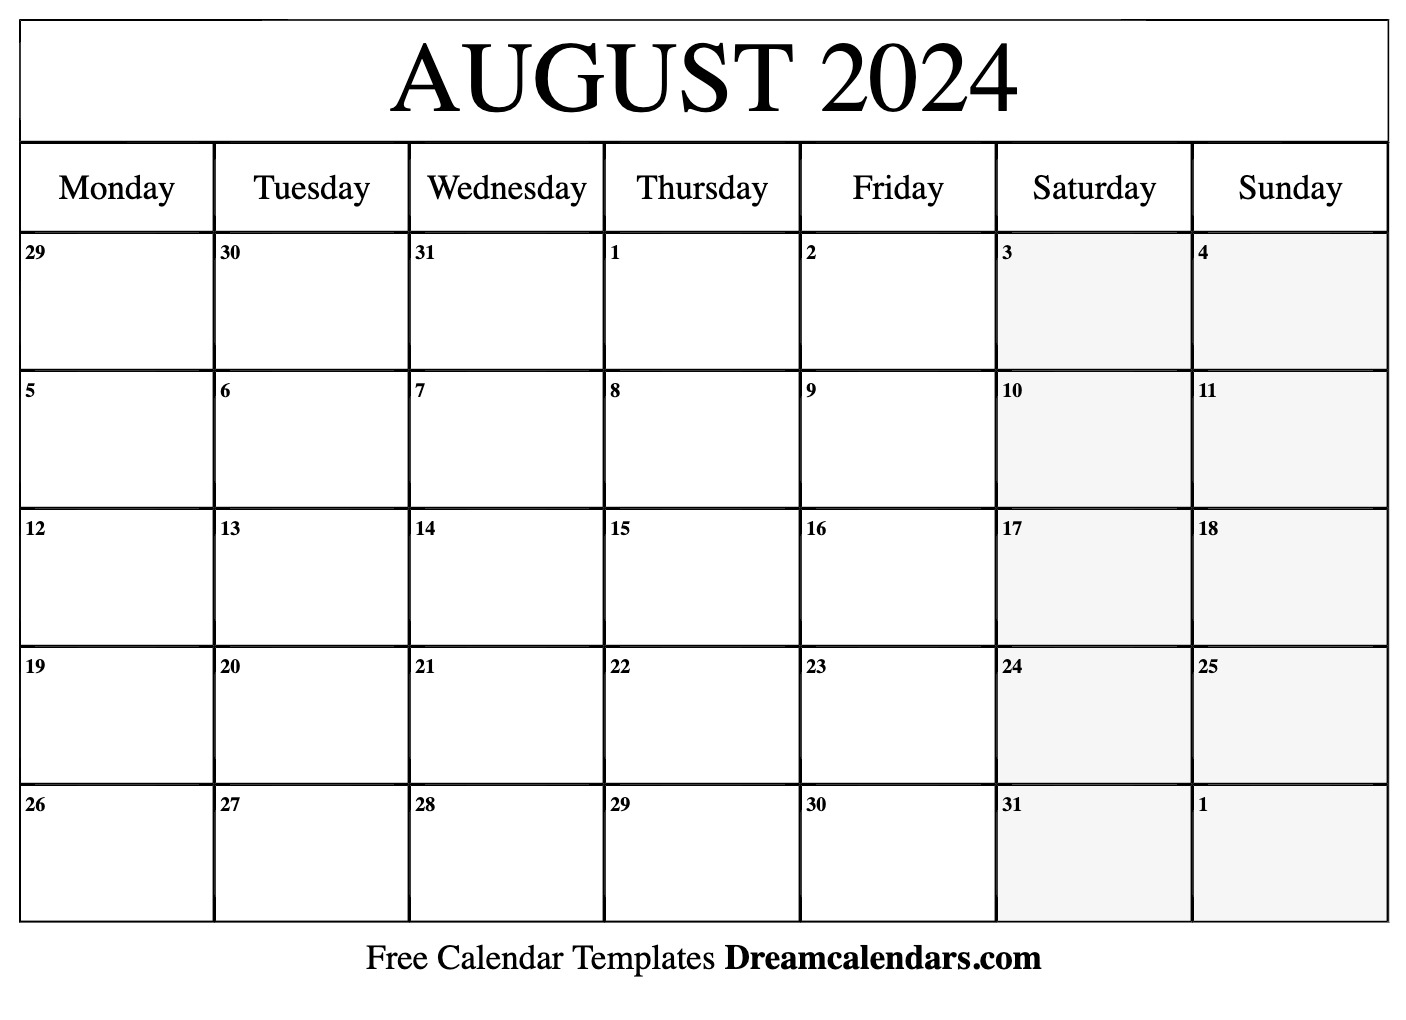 August 2024 Calendar | Free Blank Printable With Holidays for August Free Printable Calendar 2024